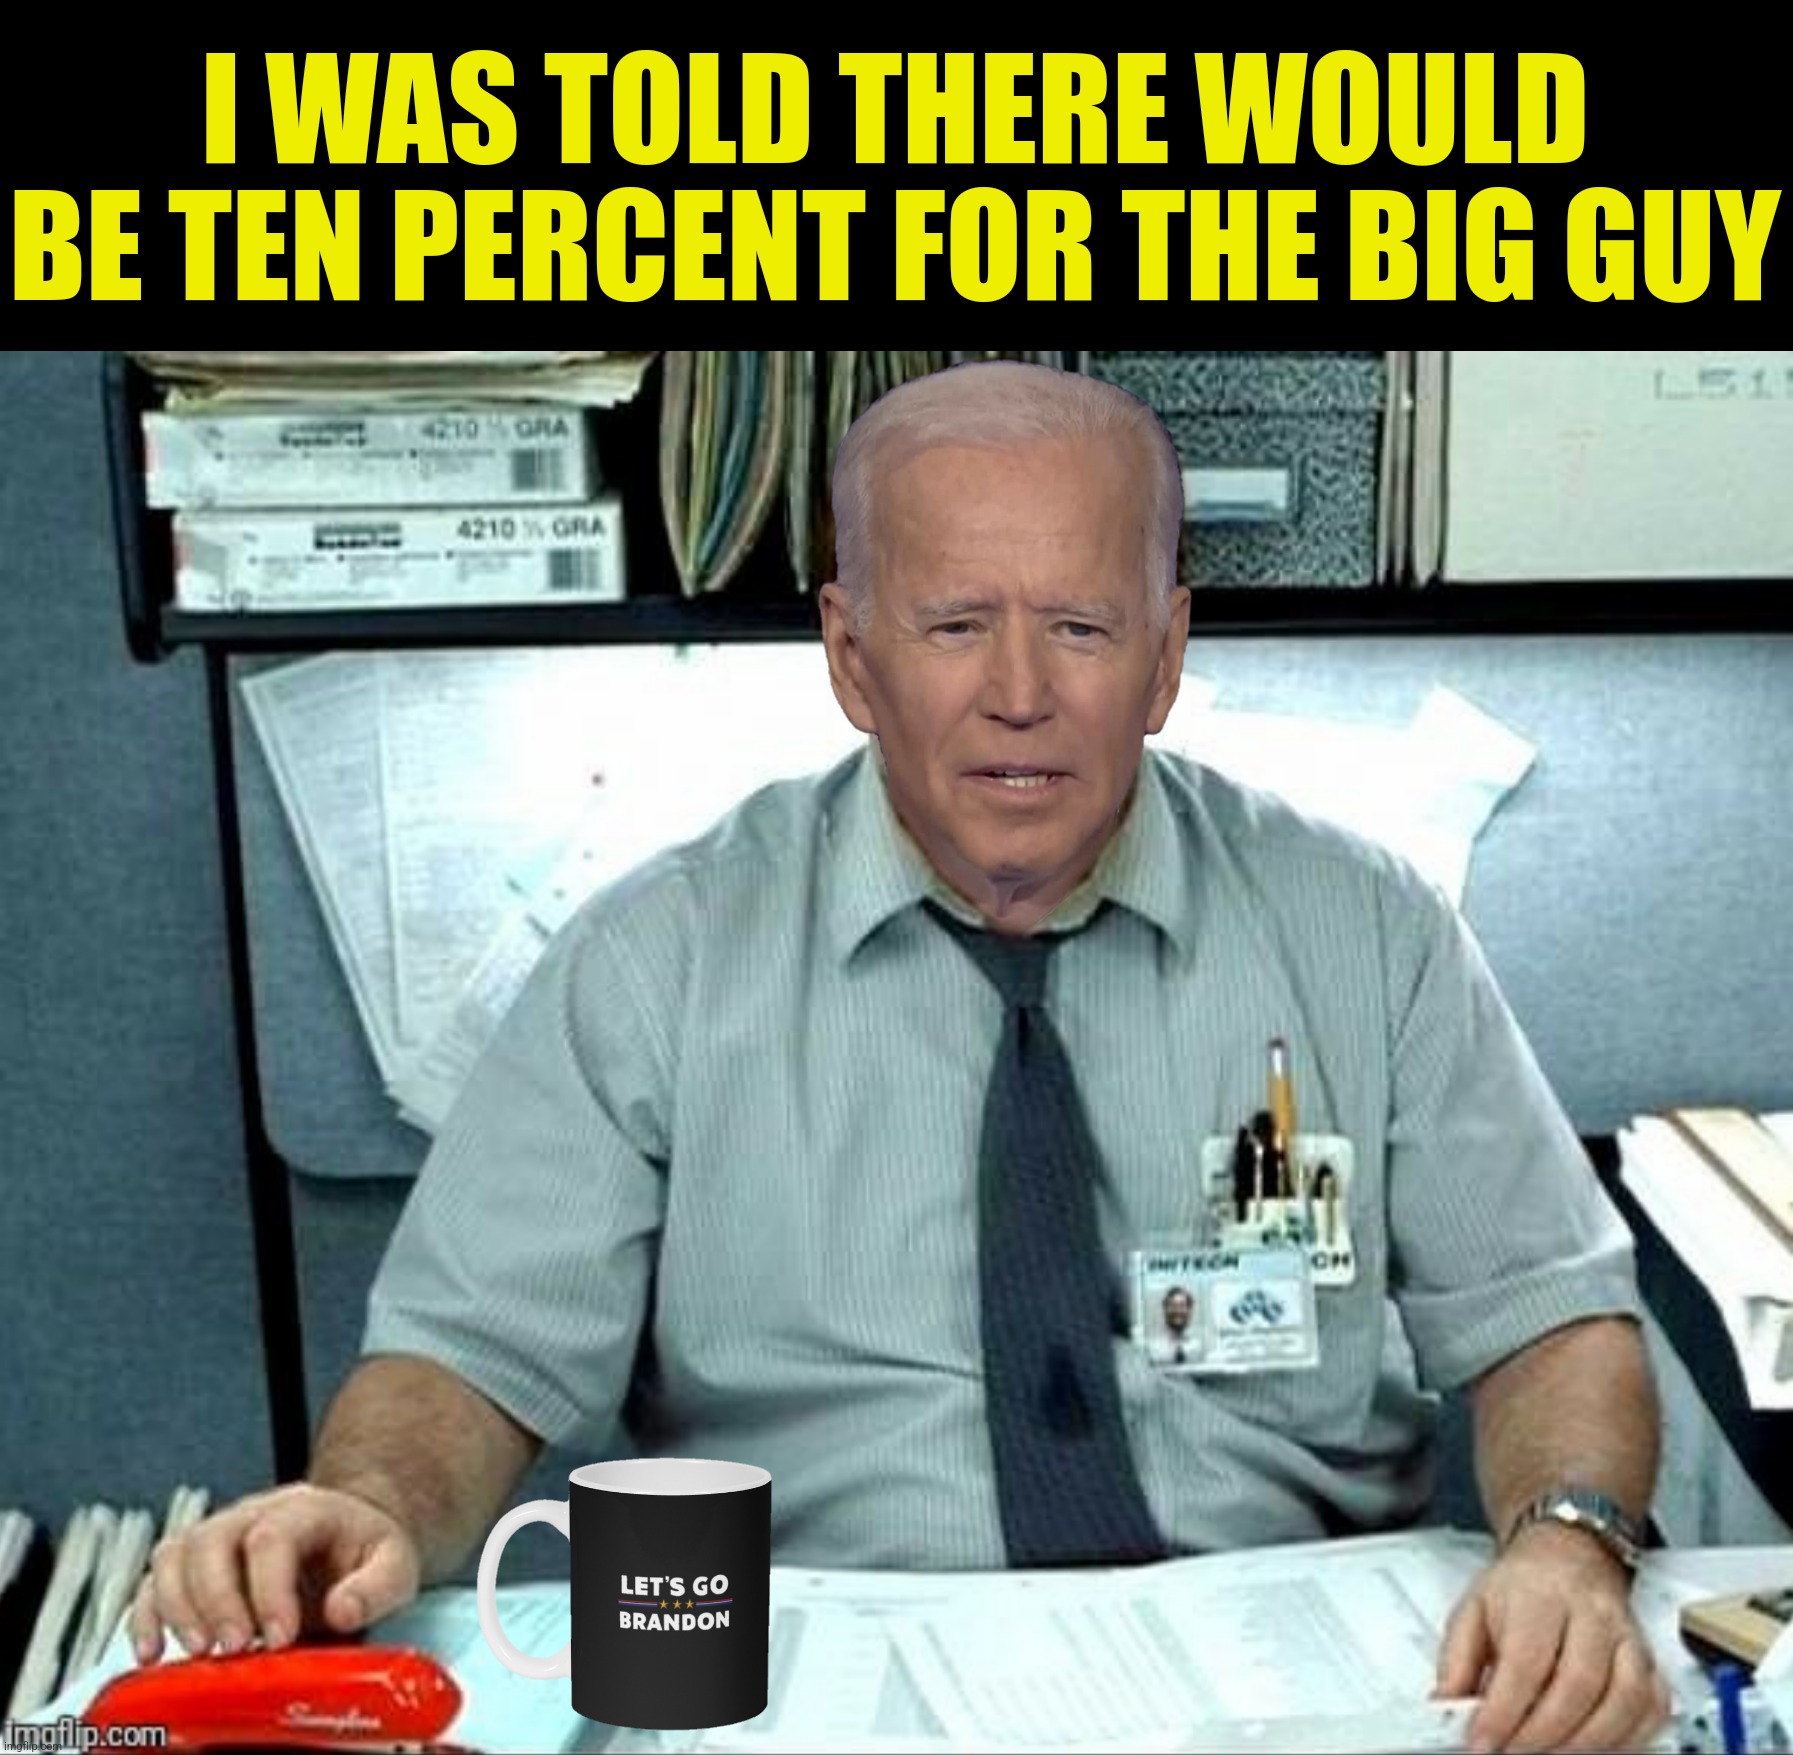 I WAS TOLD THERE WOULD BE TEN PERCENT FOR THE BIG GUY | made w/ Imgflip meme maker